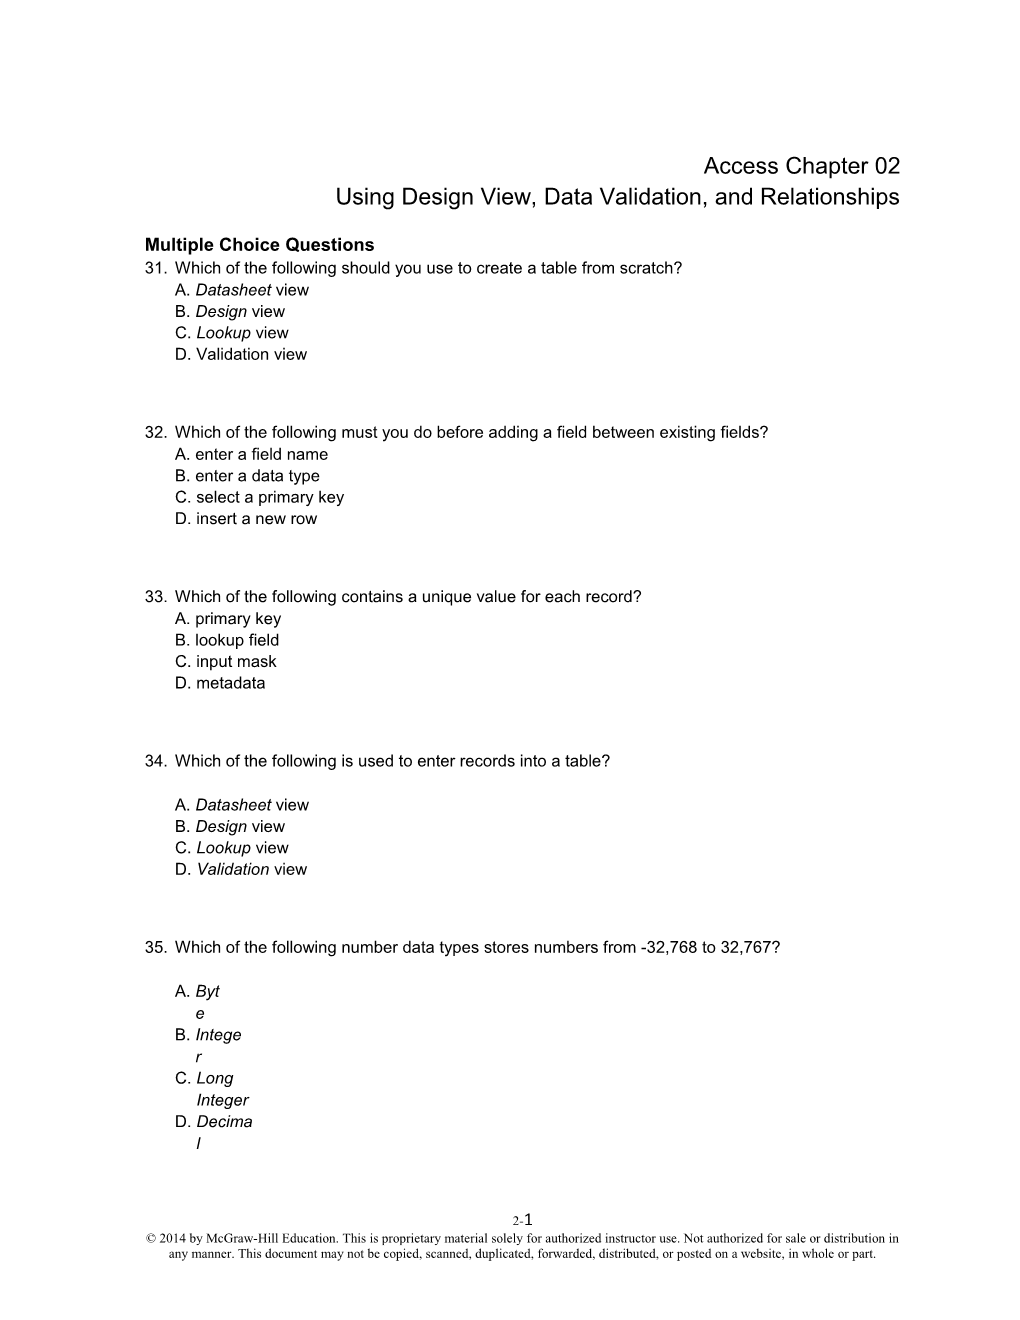 Using Design View, Data Validation, and Relationships